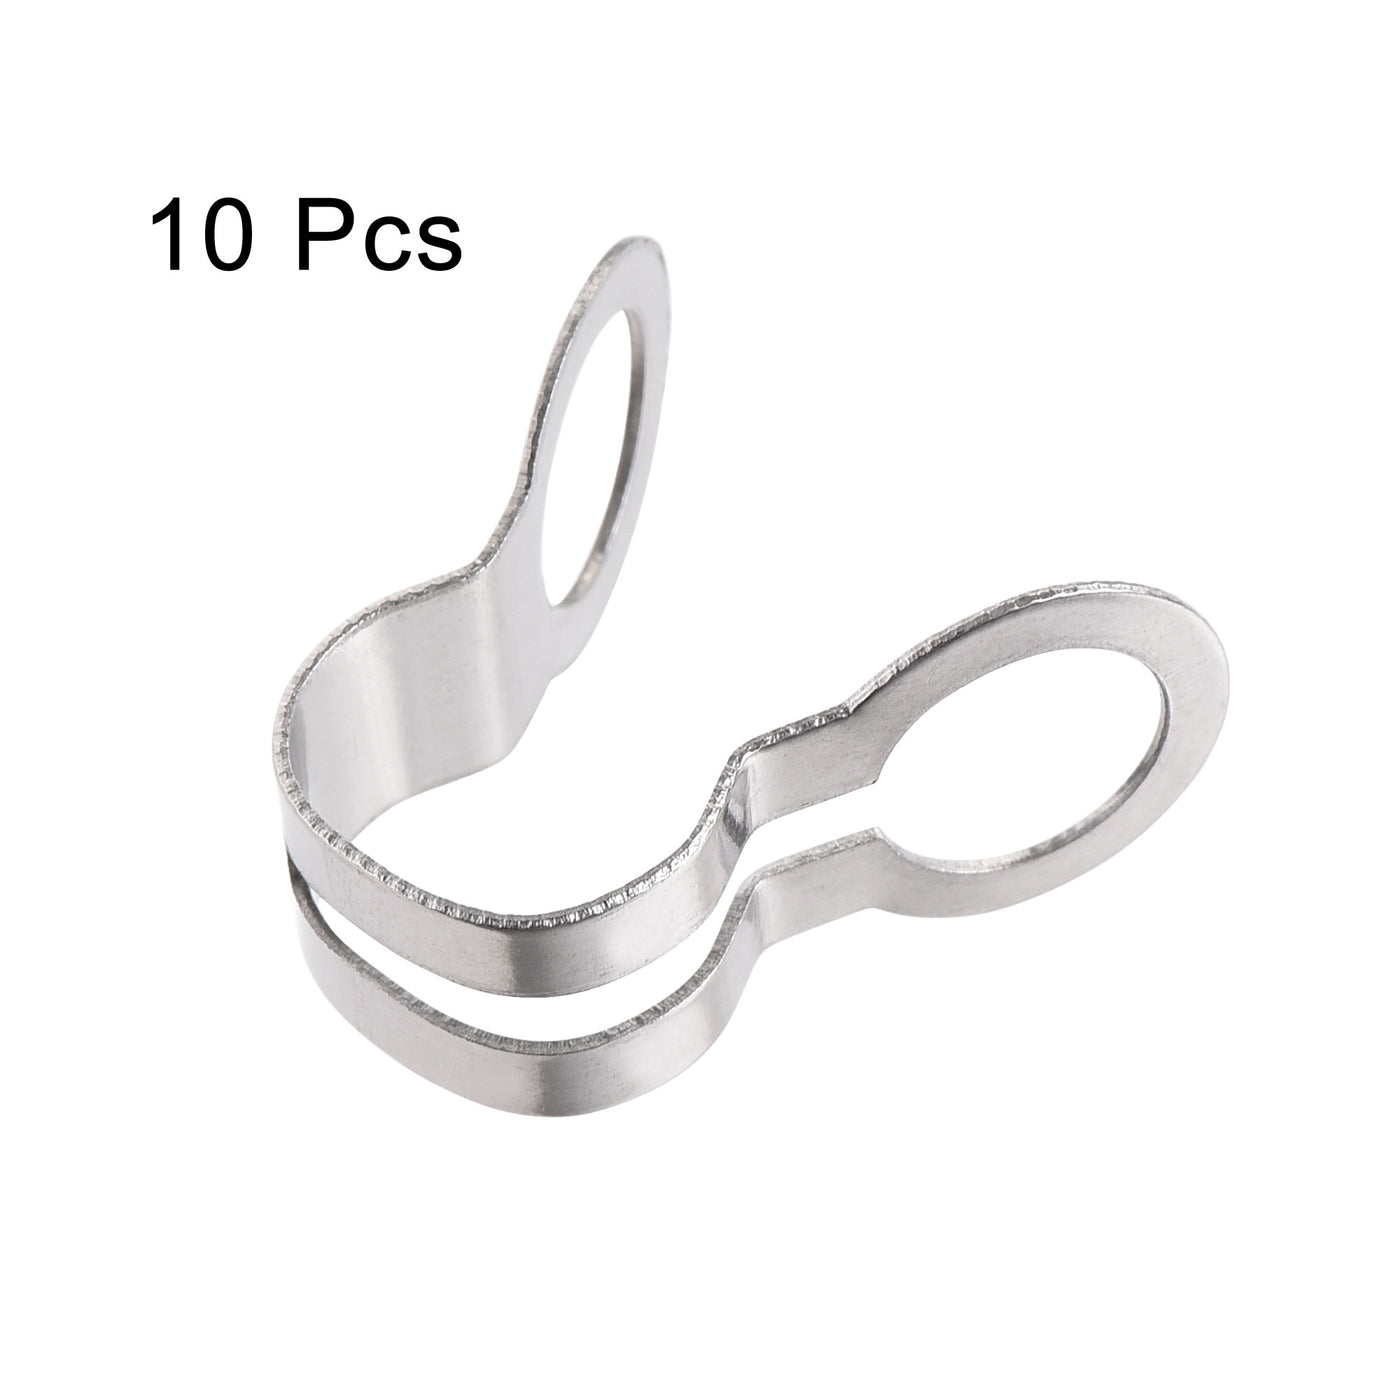 uxcell Uxcell Ball Chain Connector, 8mm Double Ring Style Link Stainless Steel Loop Connection, Pack of 10